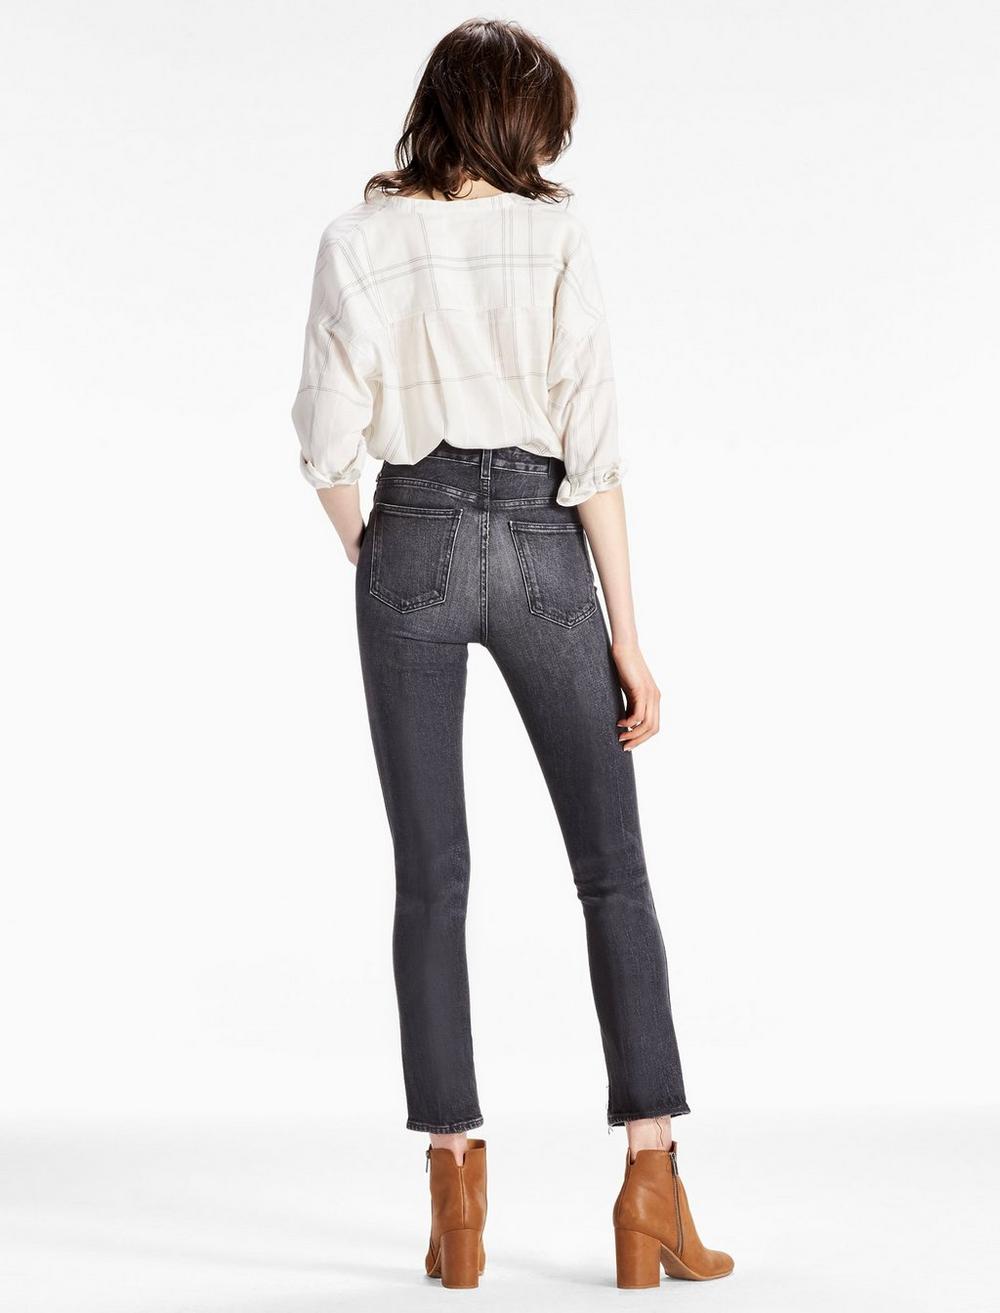 HIGH RISE TOMBOY CROPPED STRAIGHT LEG JEAN WITH SPAT HEM, image 3